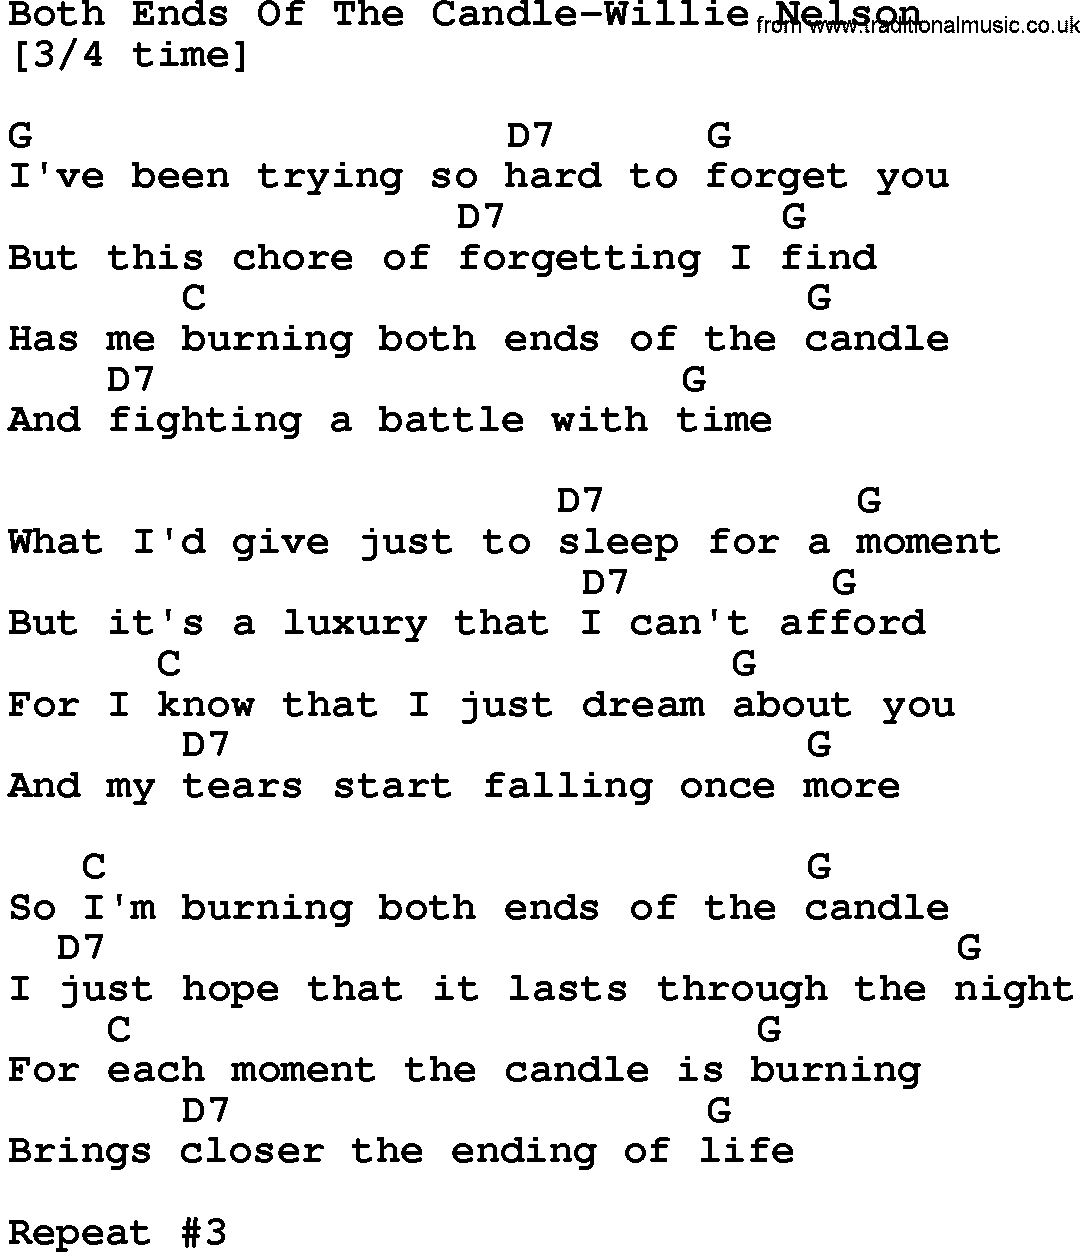 Country music song: Both Ends Of The Candle-Willie Nelson lyrics and chords